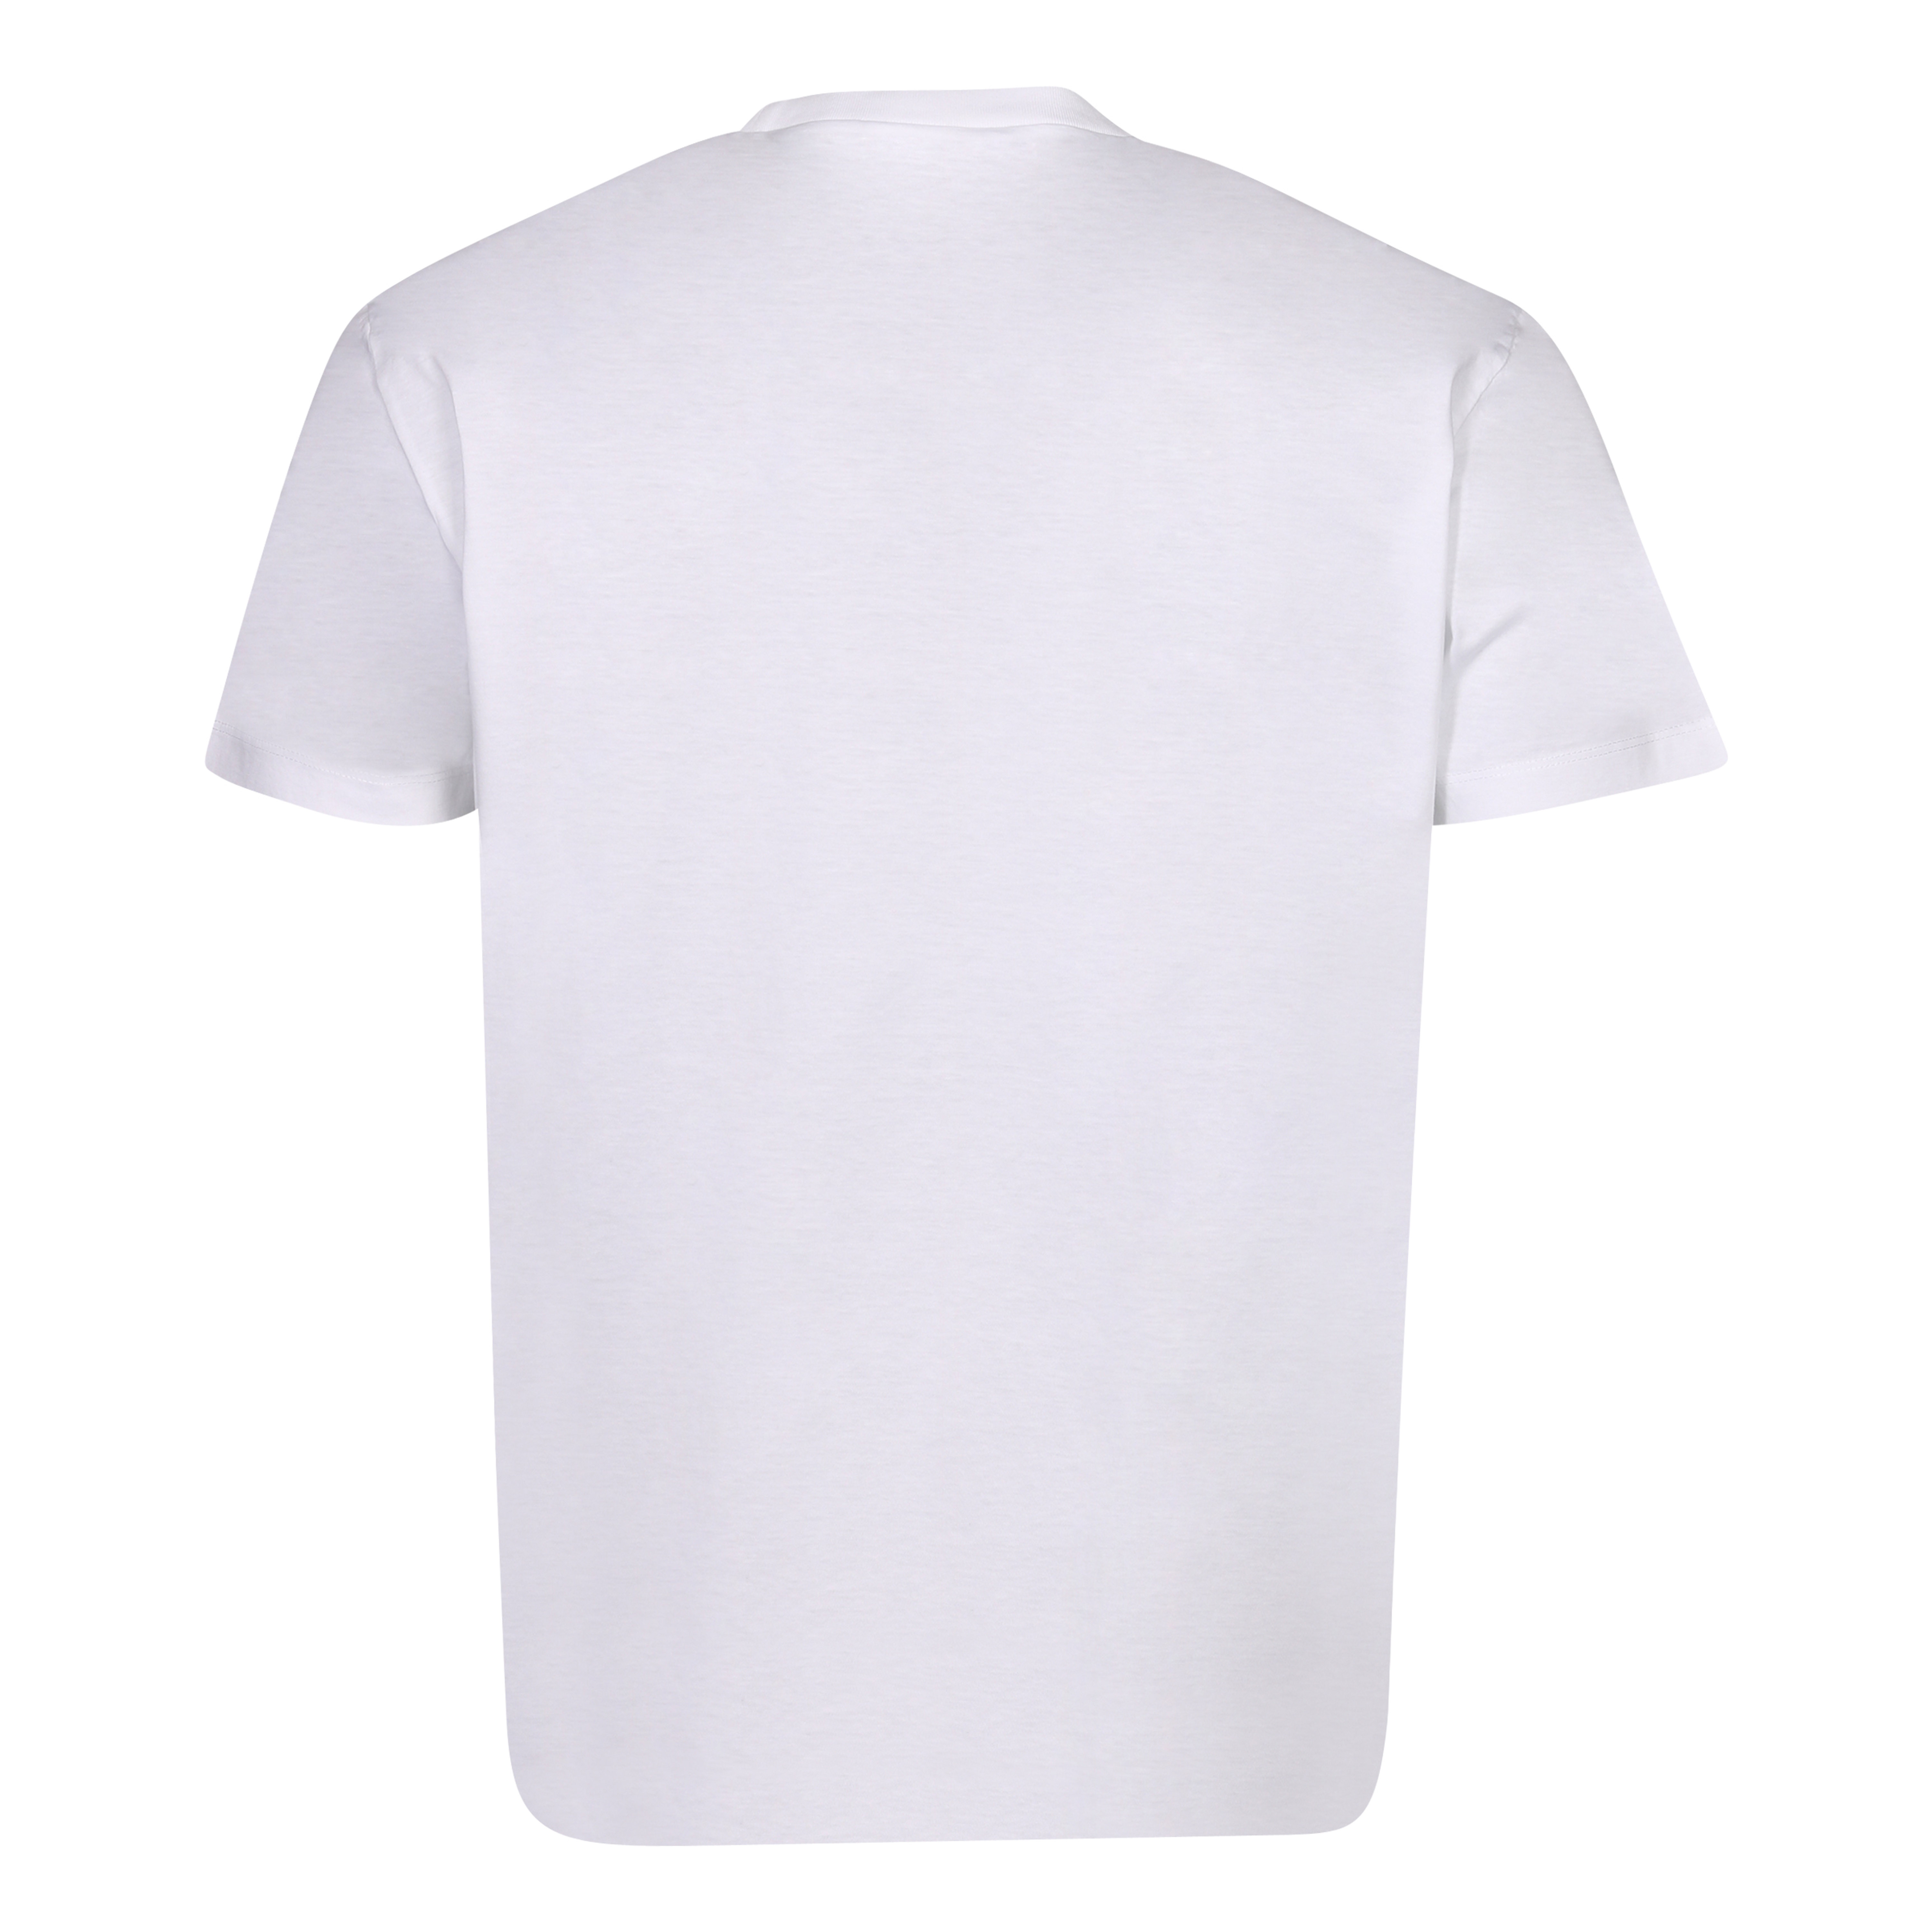 Dsquared Ceresio 9 T-Shirt in White M